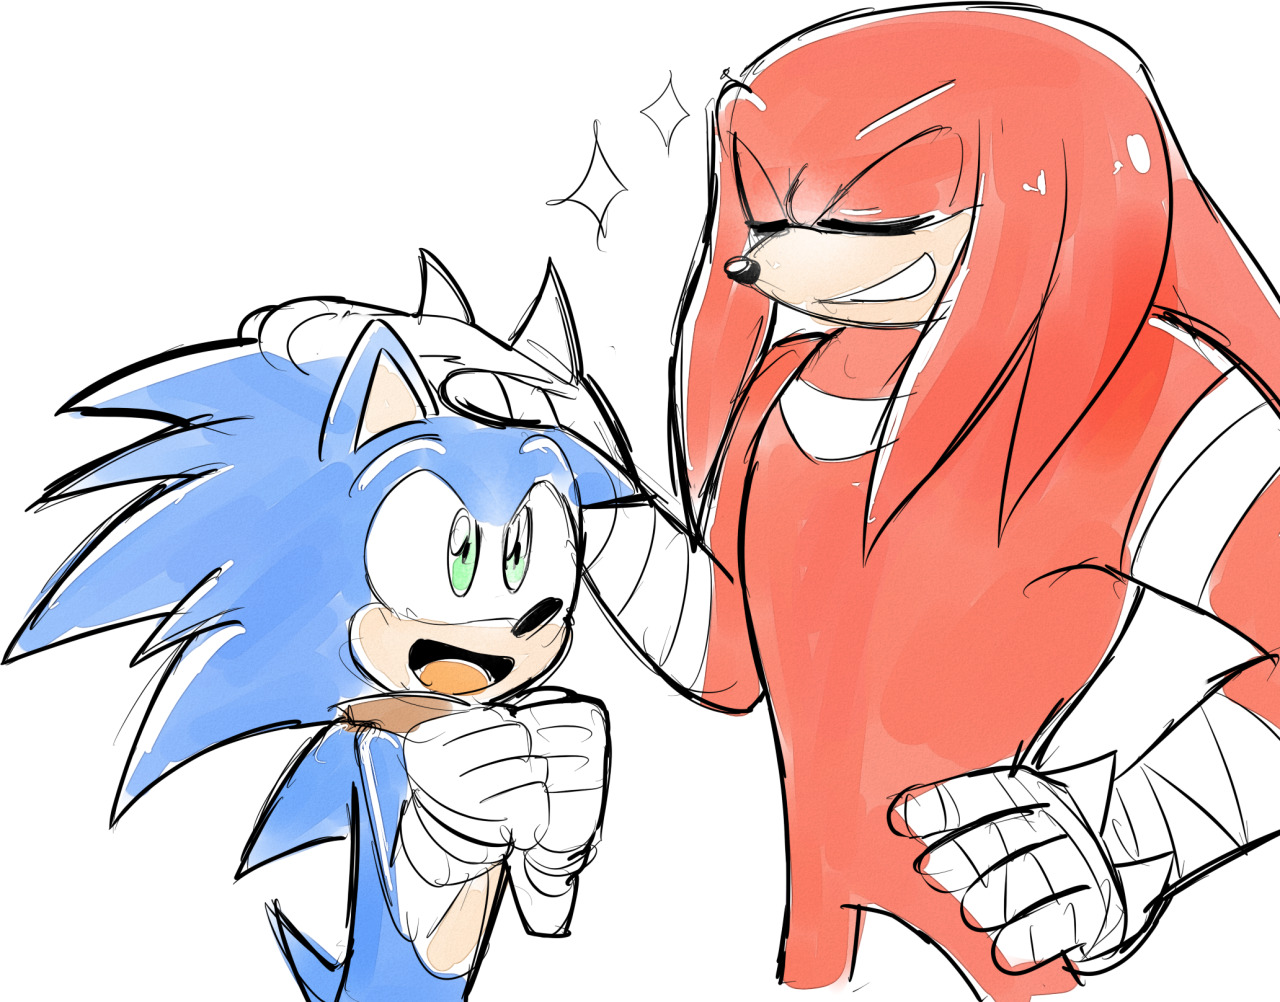 Spoiled & Knuckles💀 on X: Lazy redraw and redesign of Funtime